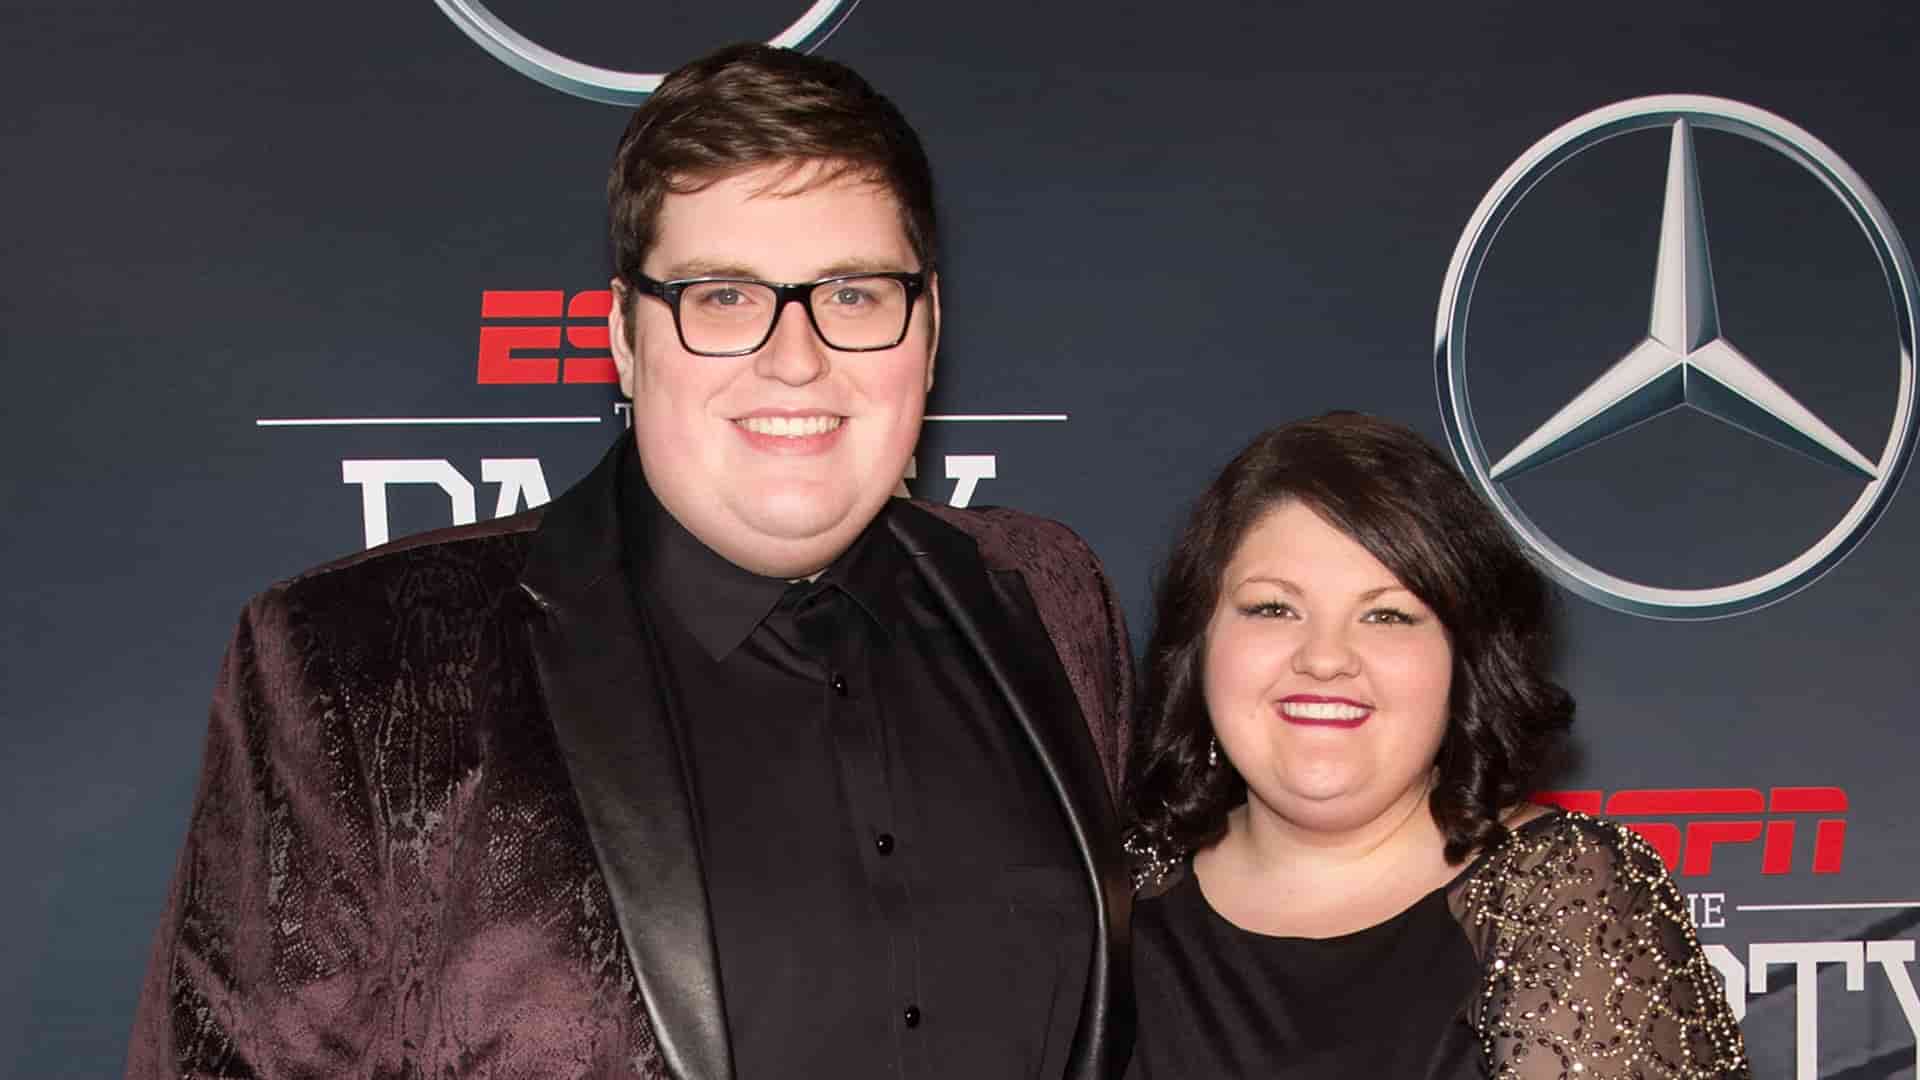 Image of Jordan Smith with his wife, Kristen Denny